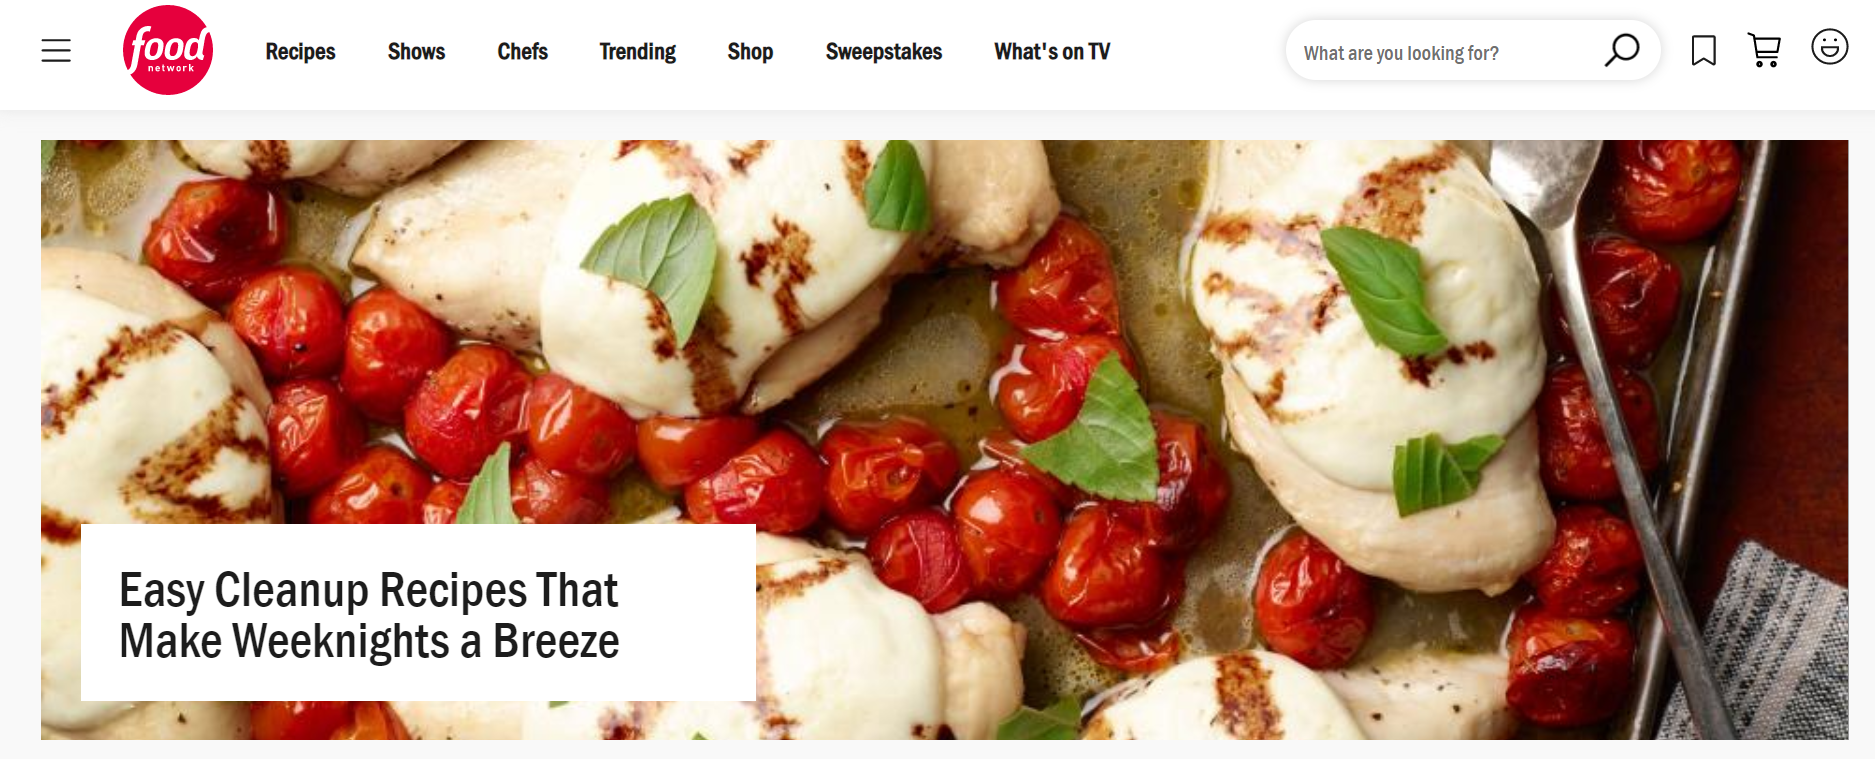 Food Network Replaces Magazine Subscriptions, Cooking Lessons